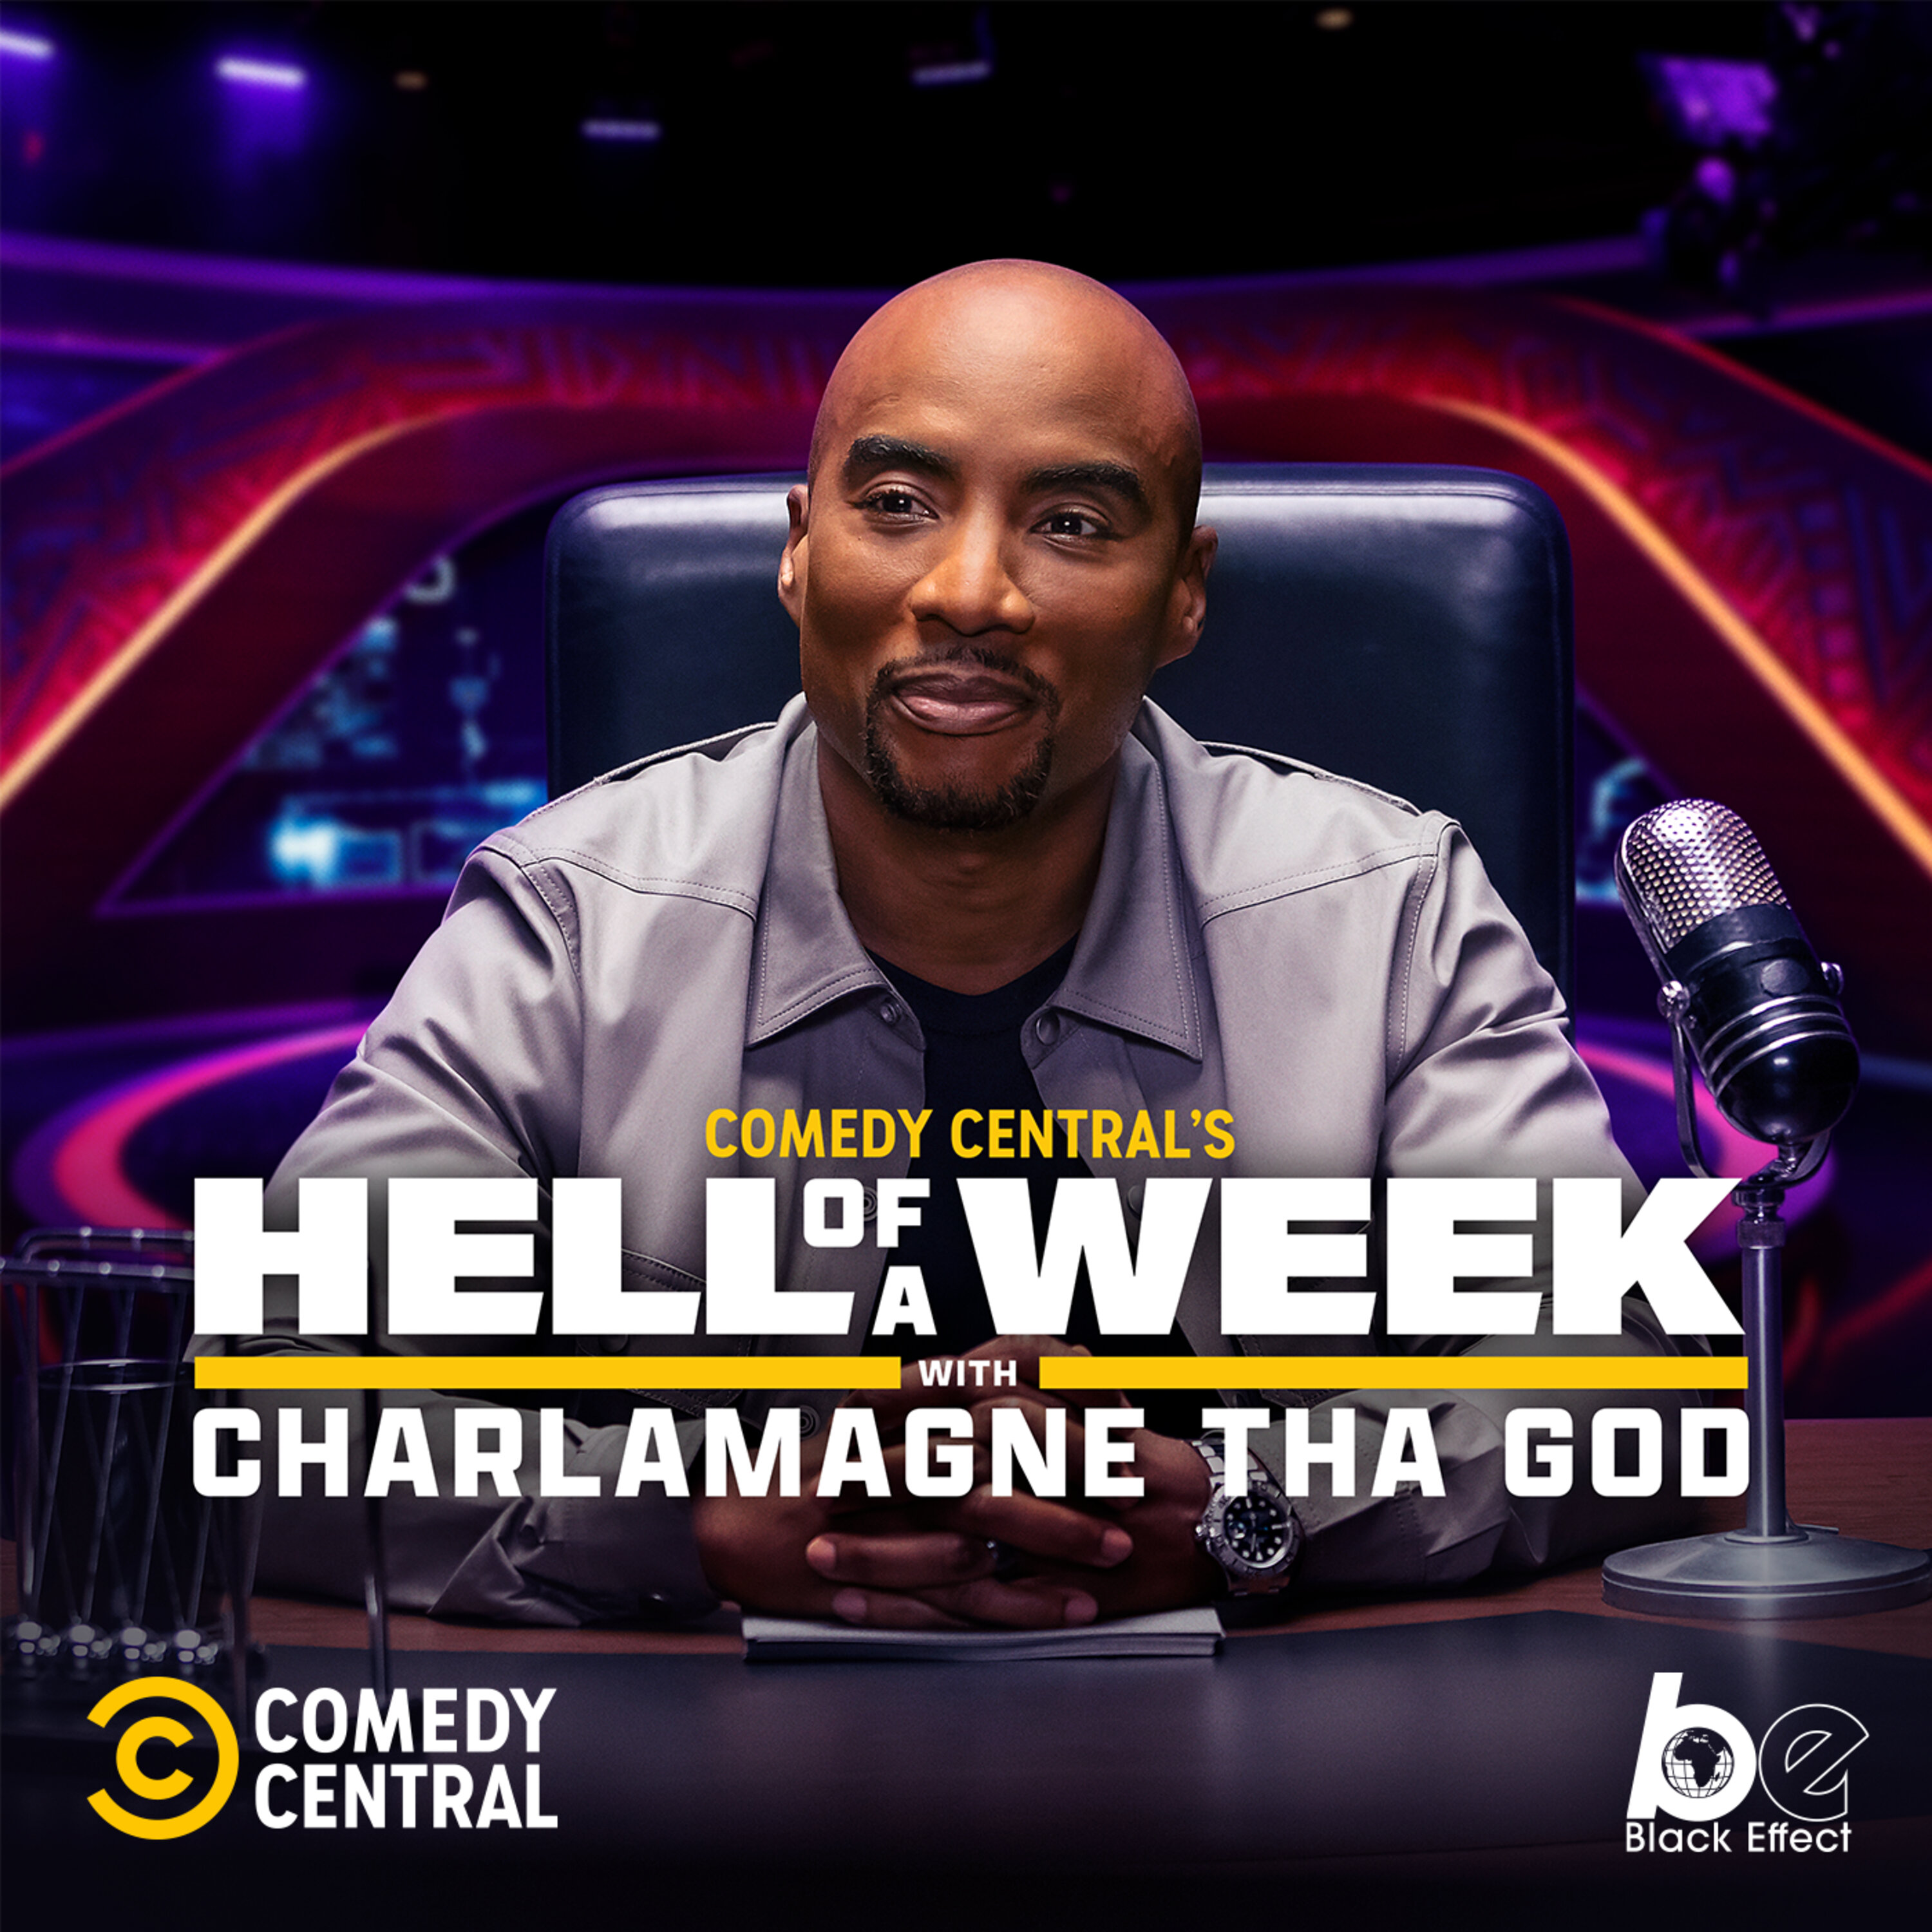 Comedy Central’s Hell Of A Week with Charlamagne Tha God podcast show image